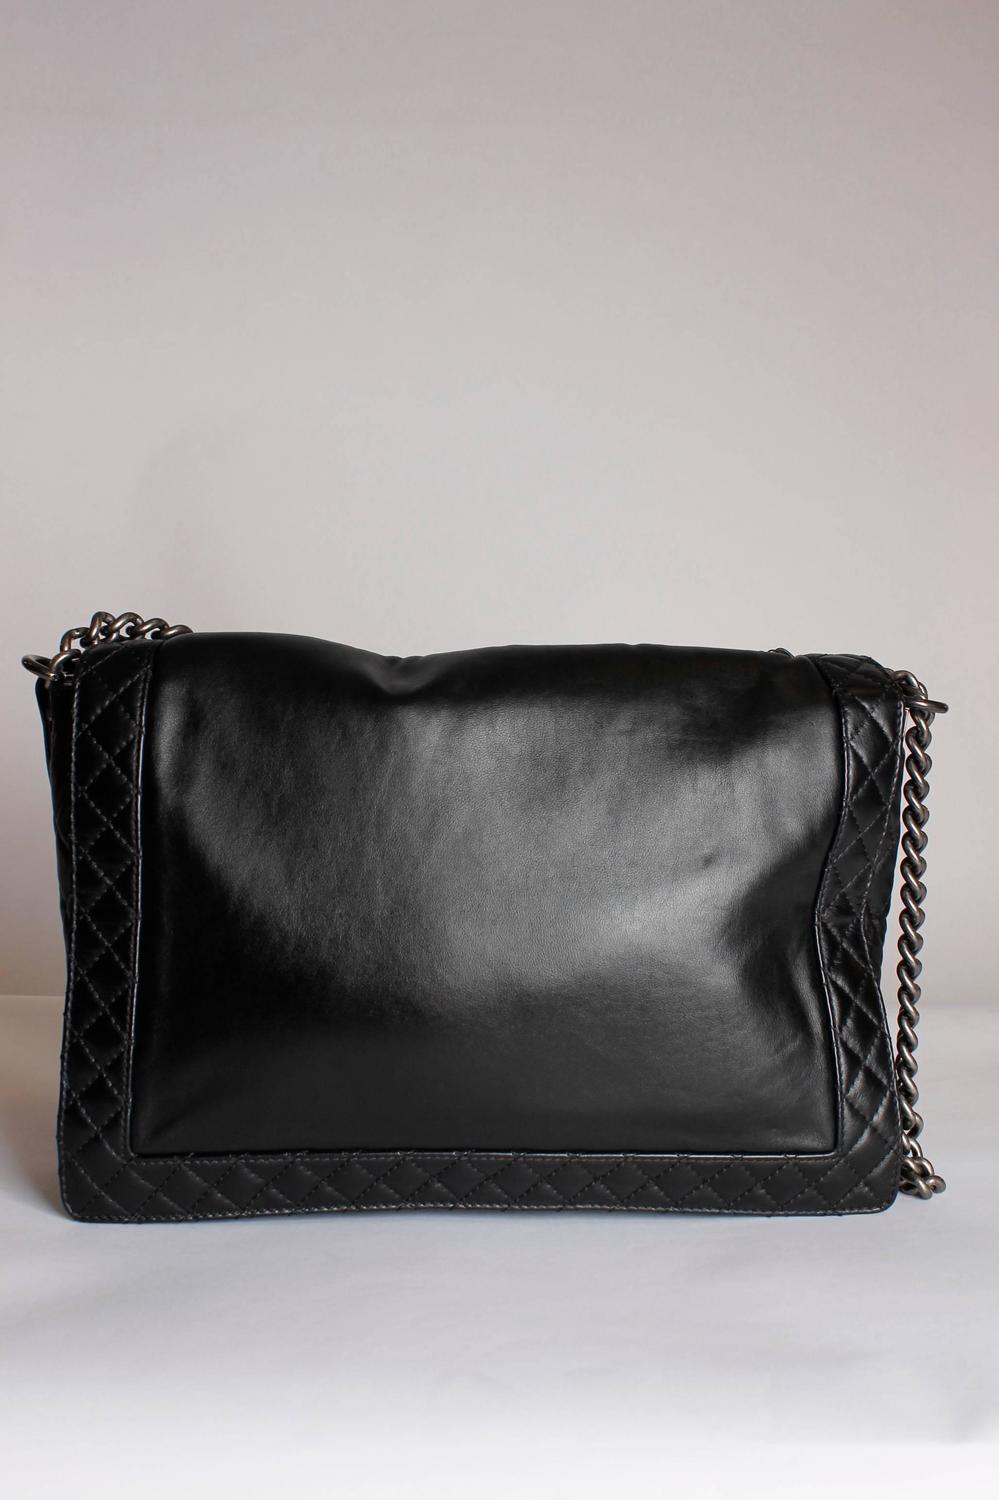 Chanel Boy Bag Enchained XL - black leather 2014 at 1stdibs